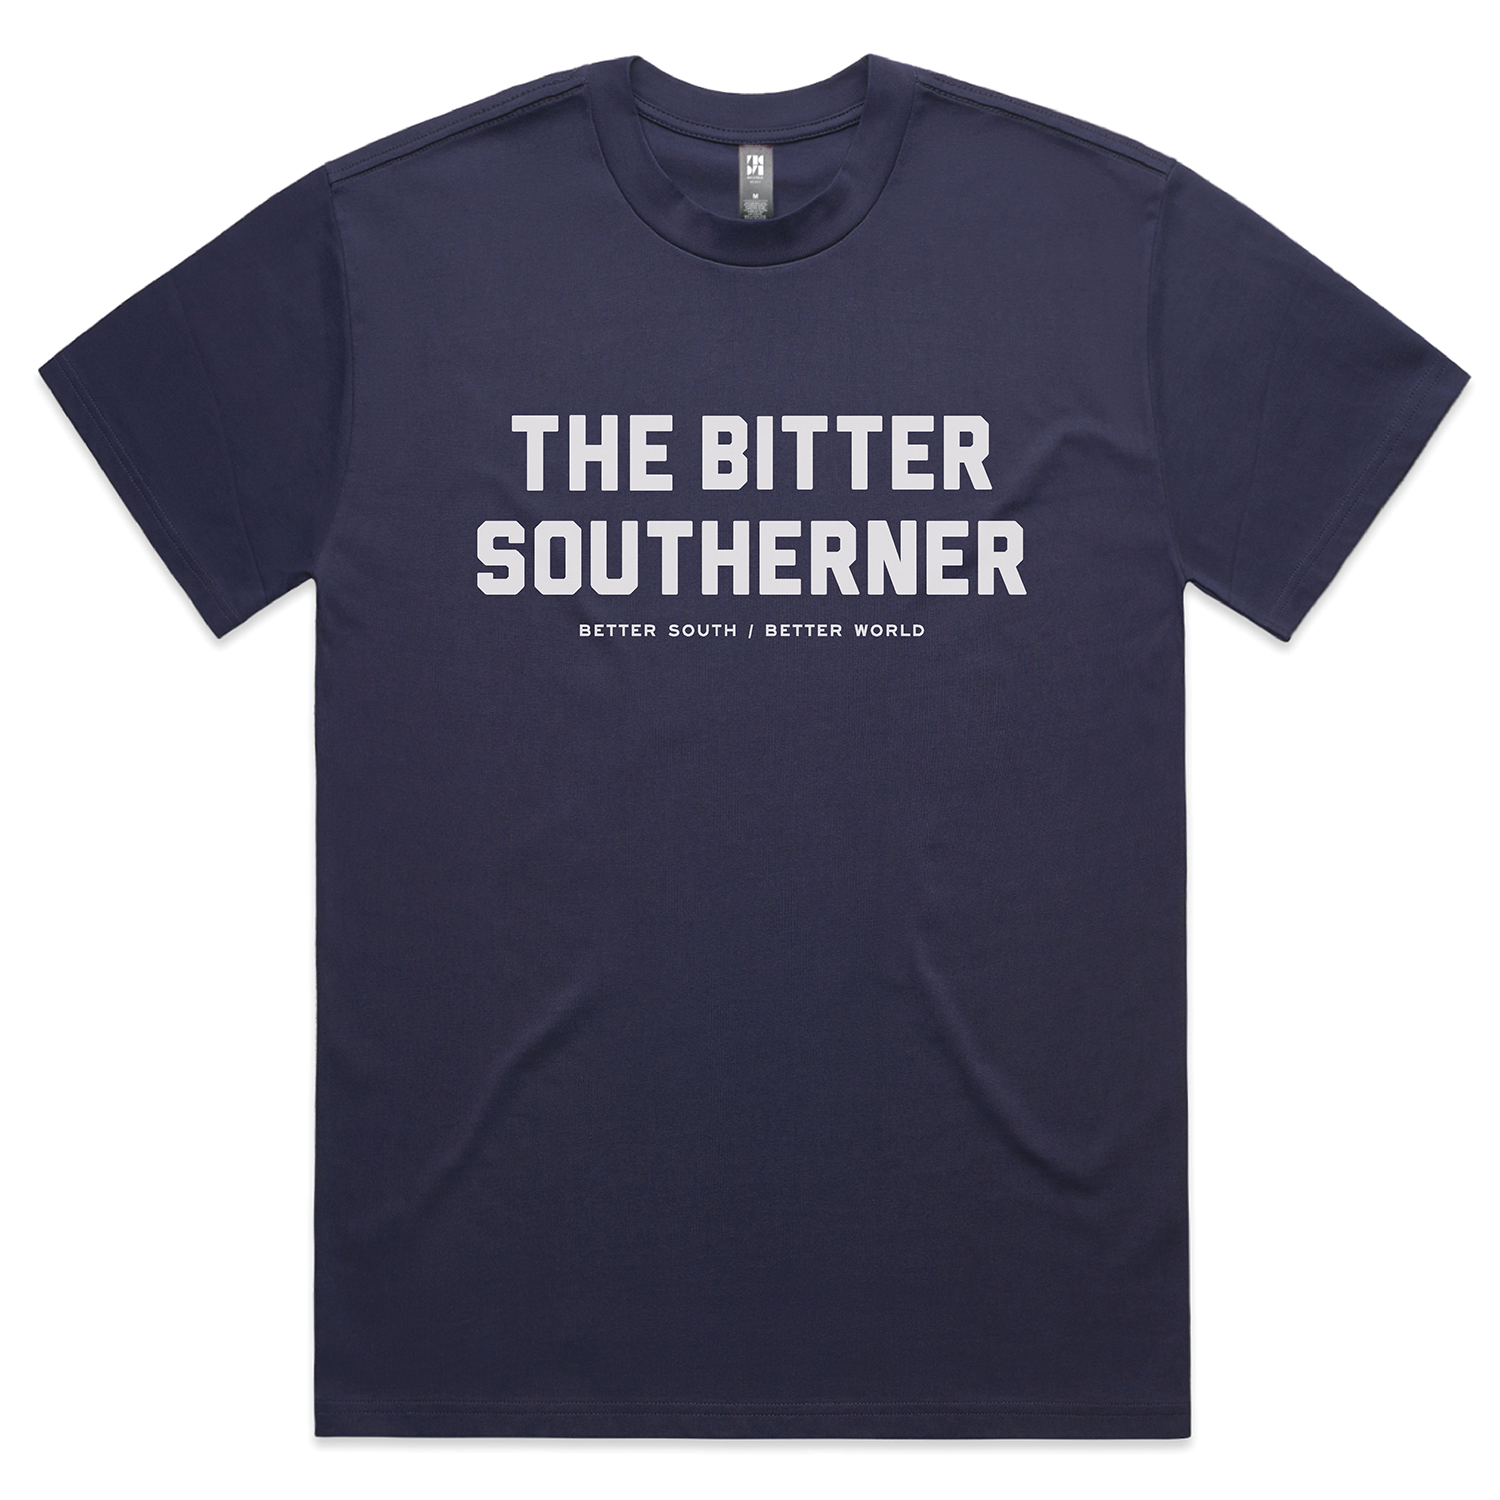 Seeing Is Believing — THE BITTER SOUTHERNER